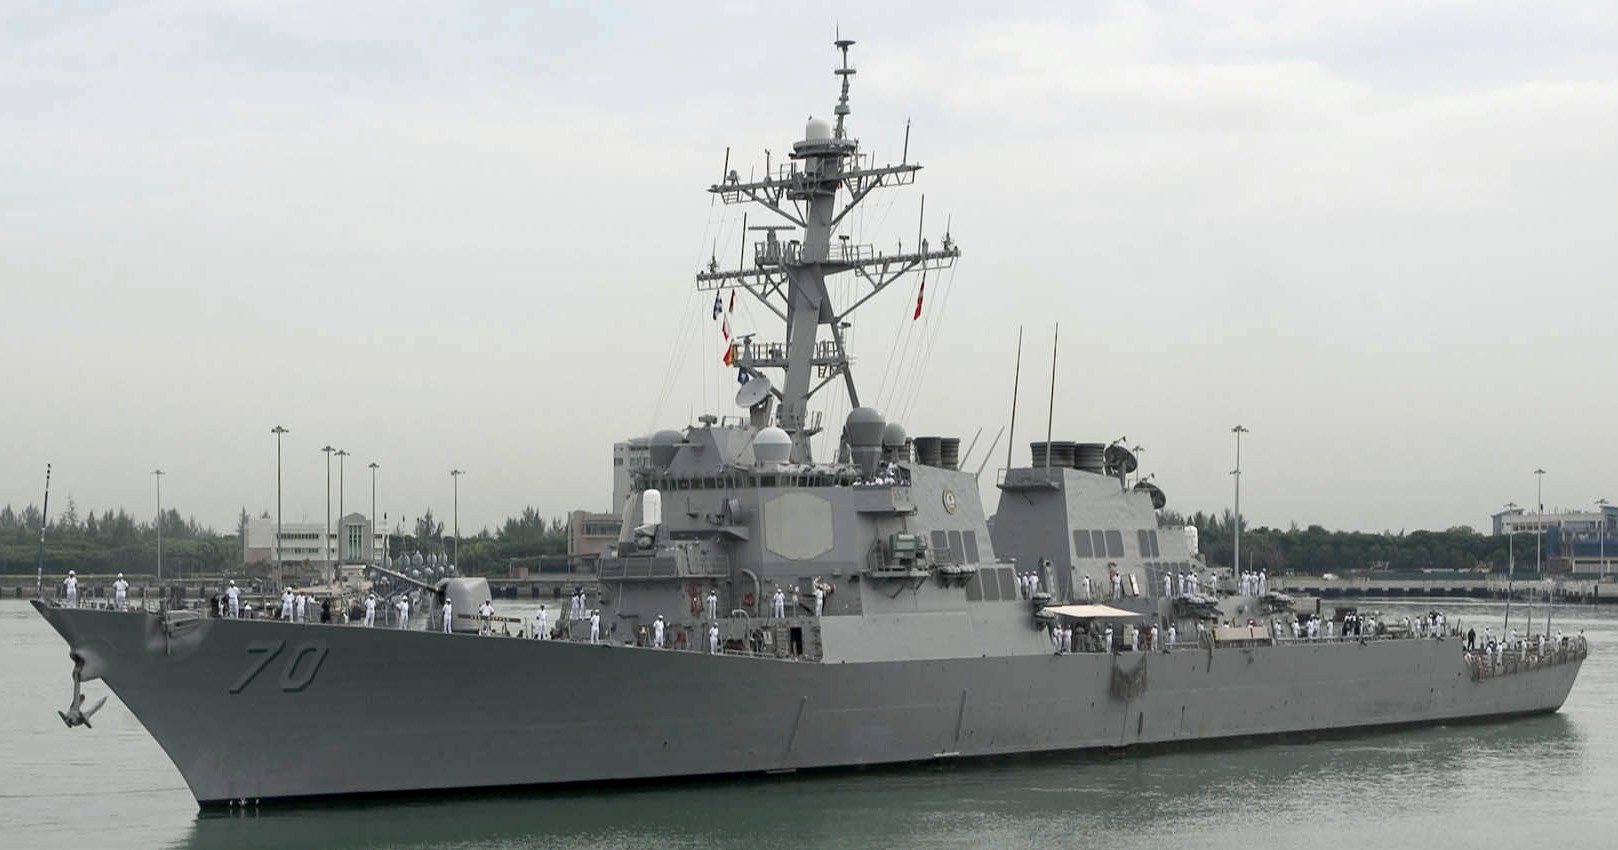 ddg-70 uss hopper guided missile destroyer arleigh burke class aegis bmd 52 changi naval base singapore